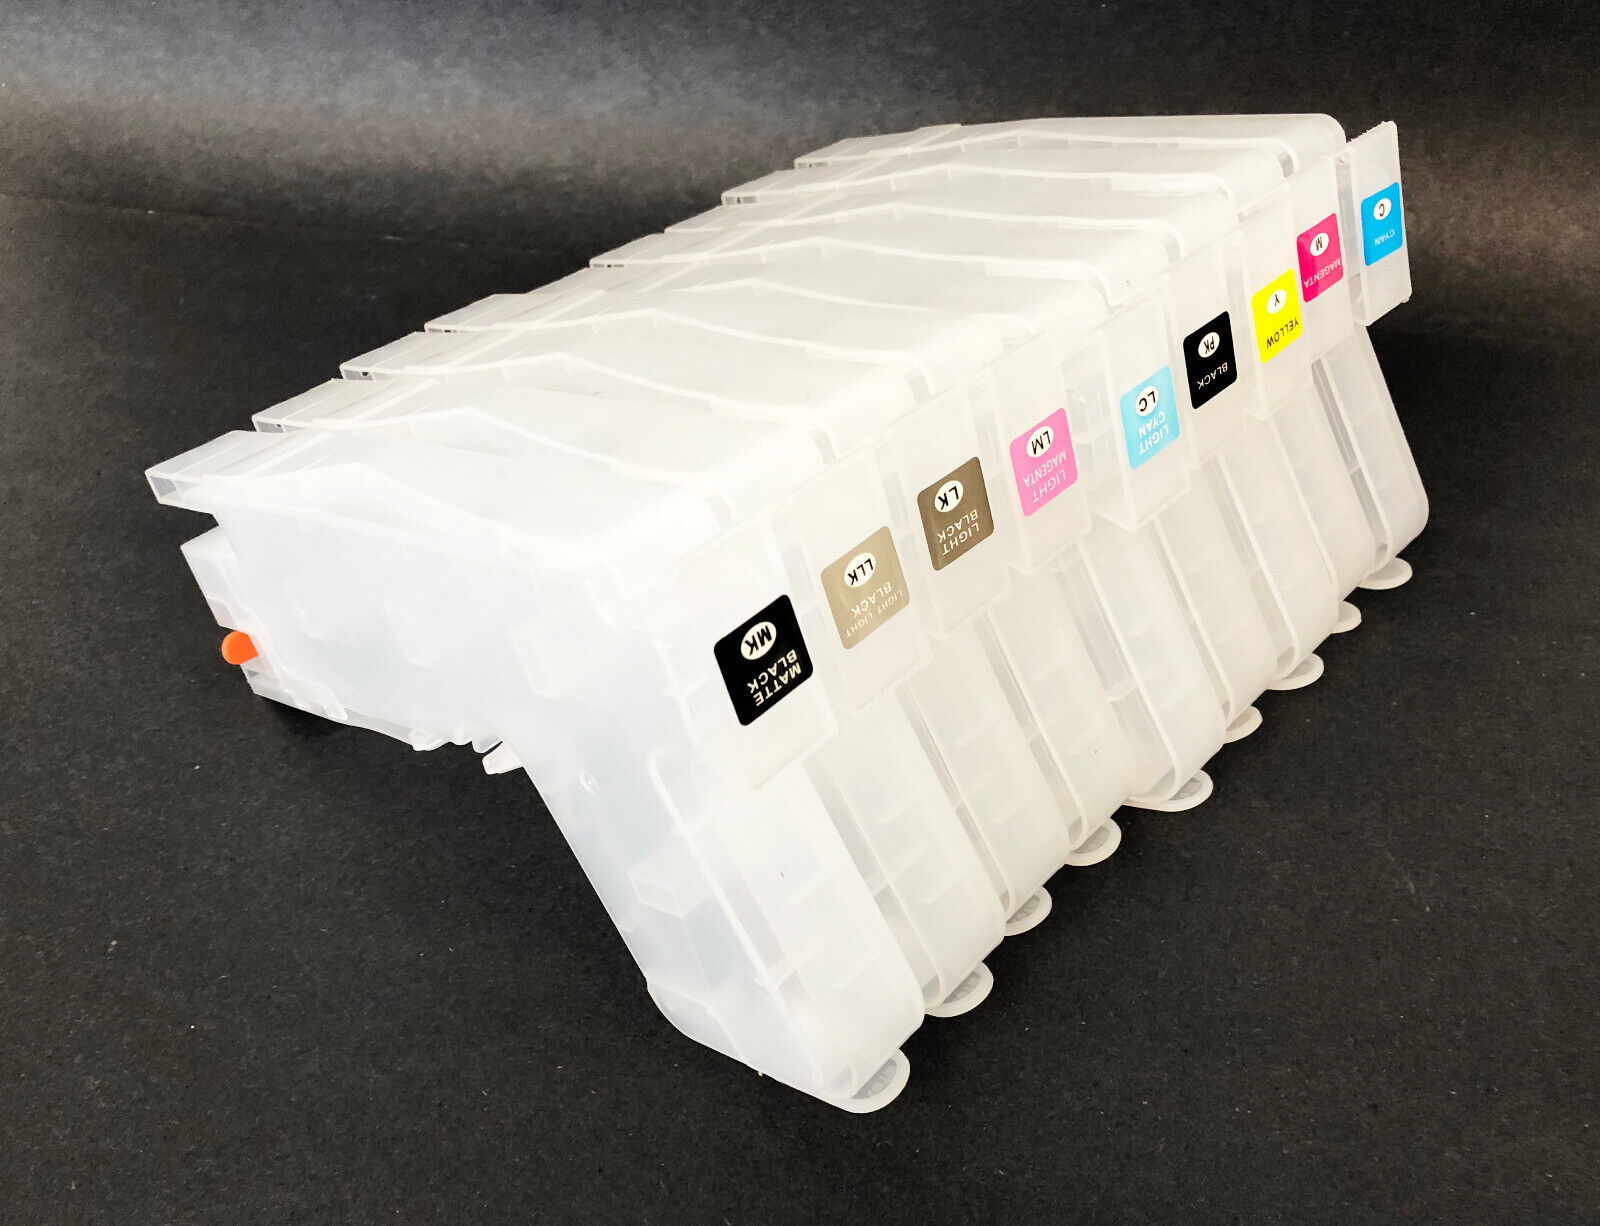 9X280ml Refillable Ink Cartridges for Stylus Pro 3880 Printer DTF K3 Pigment Ink